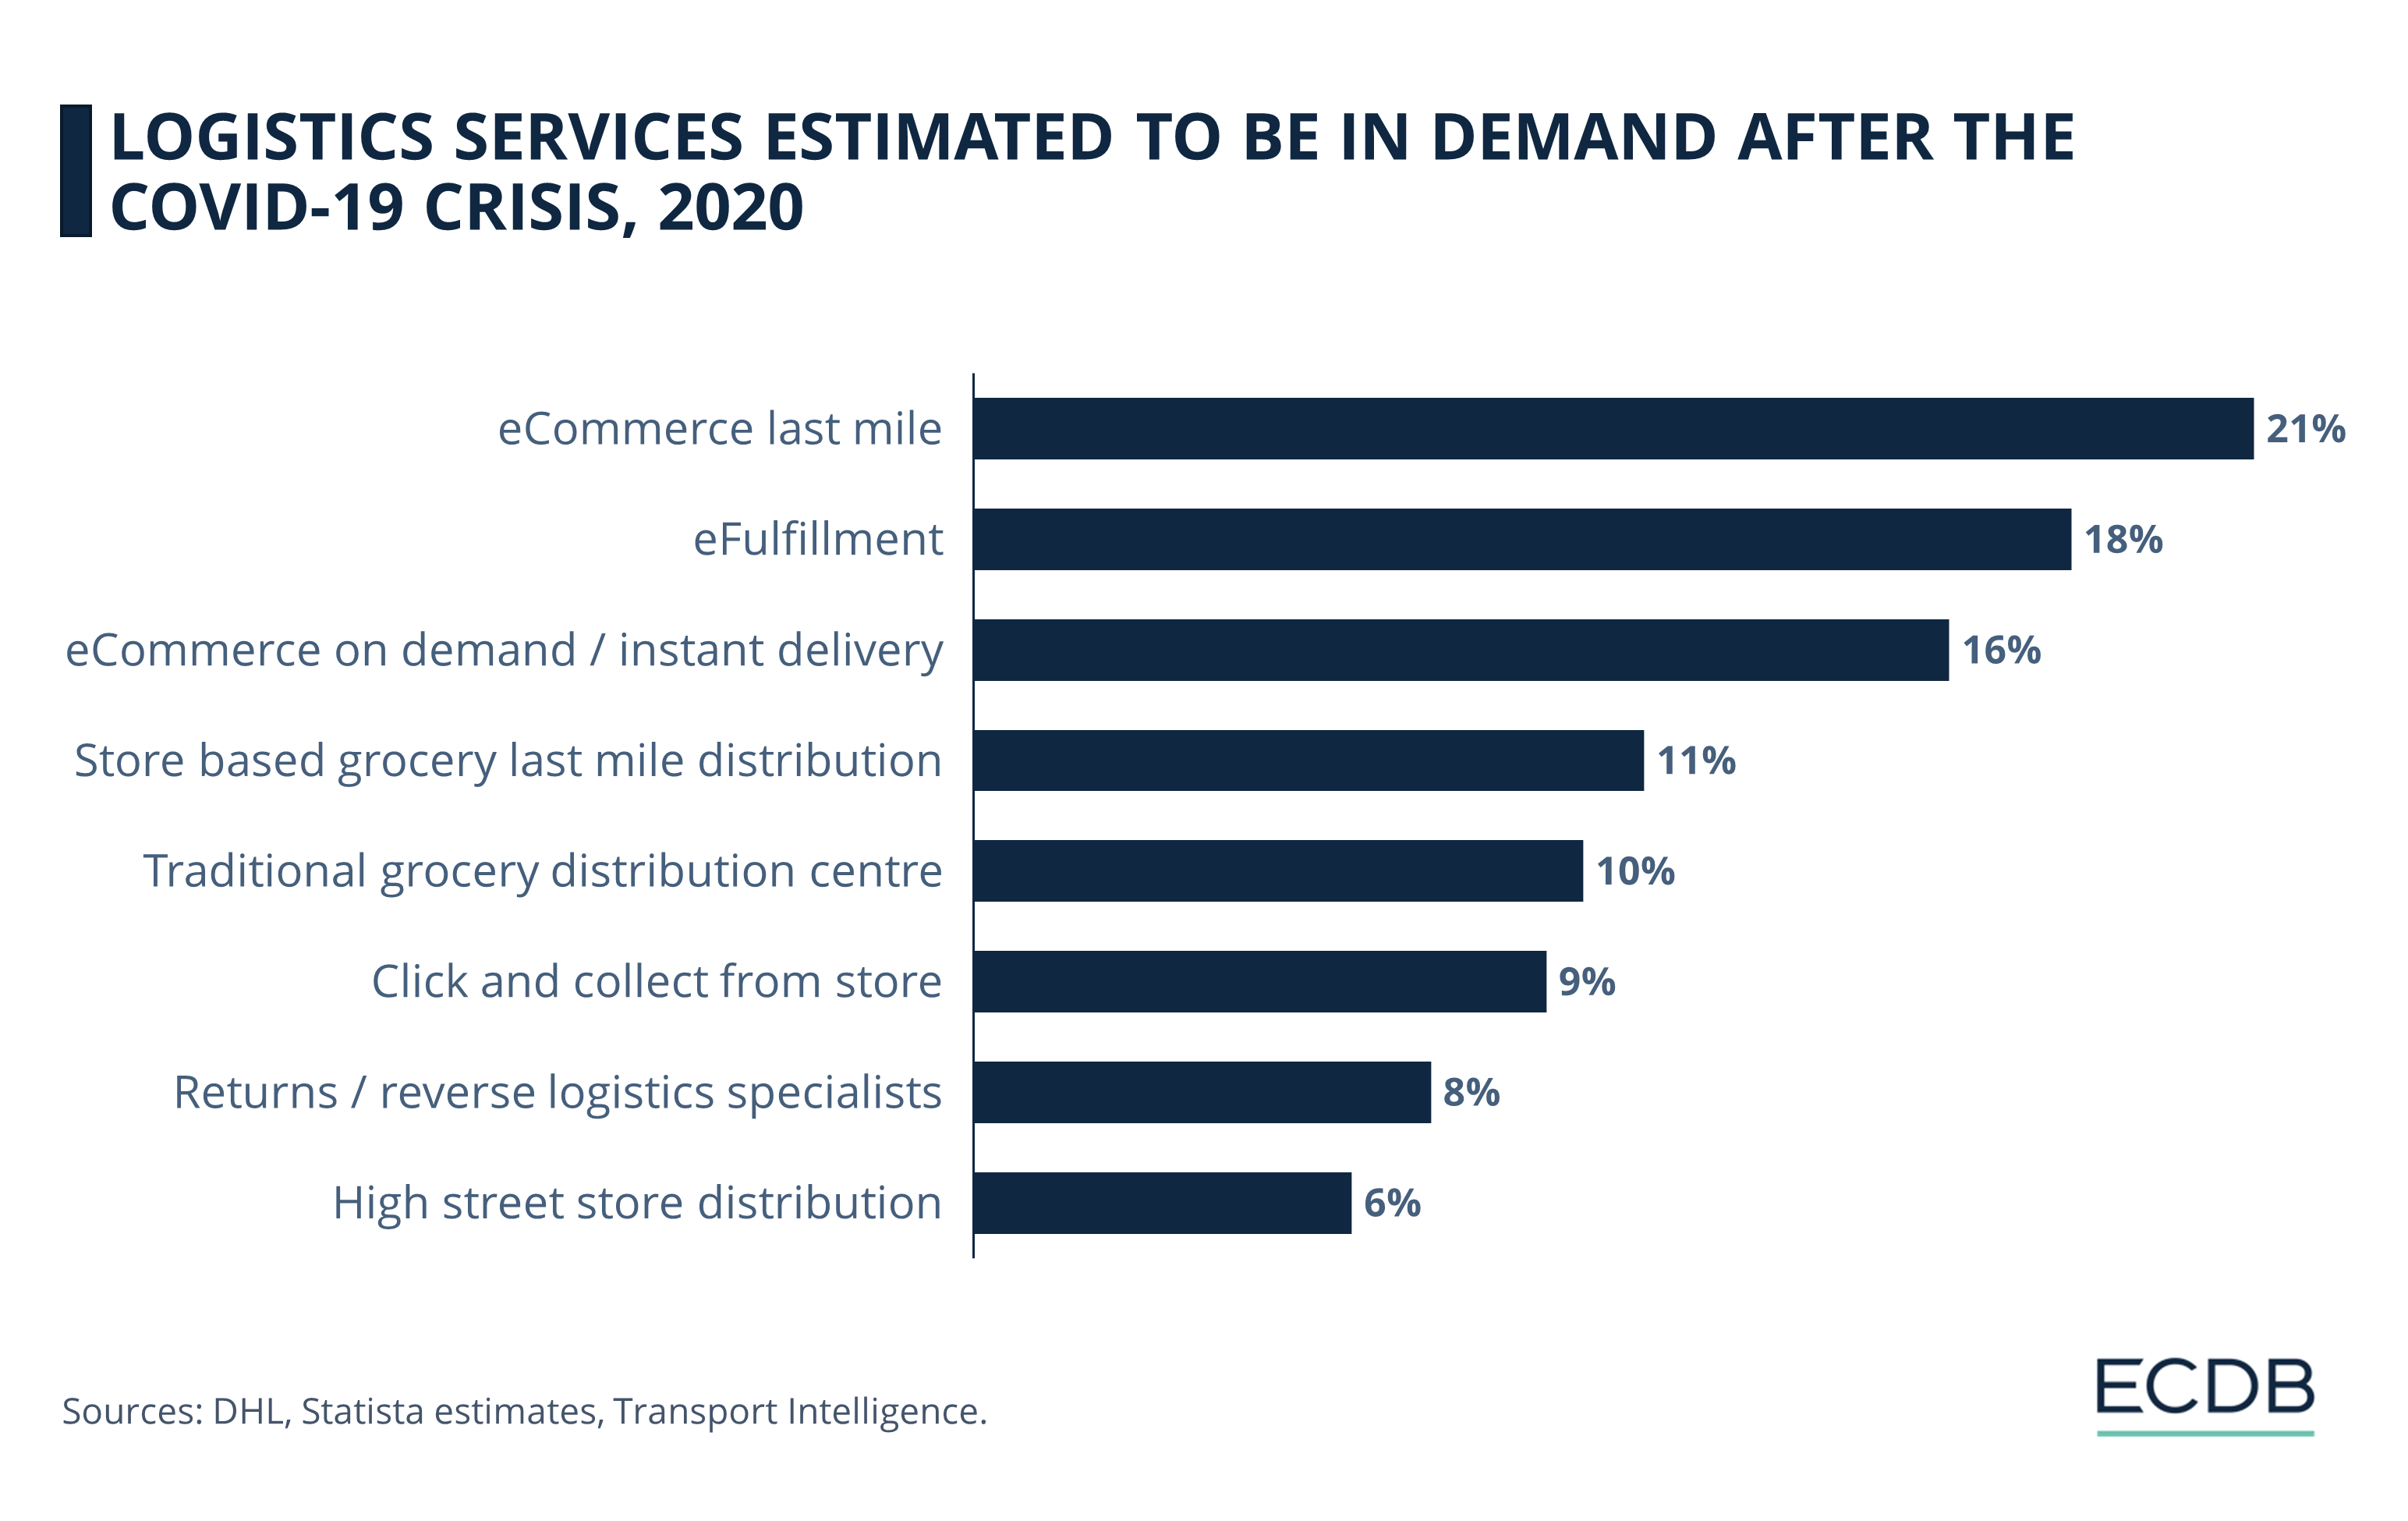 Logistics Services Estimated to Be in Demand After the COVID-19 Crisis, 2020